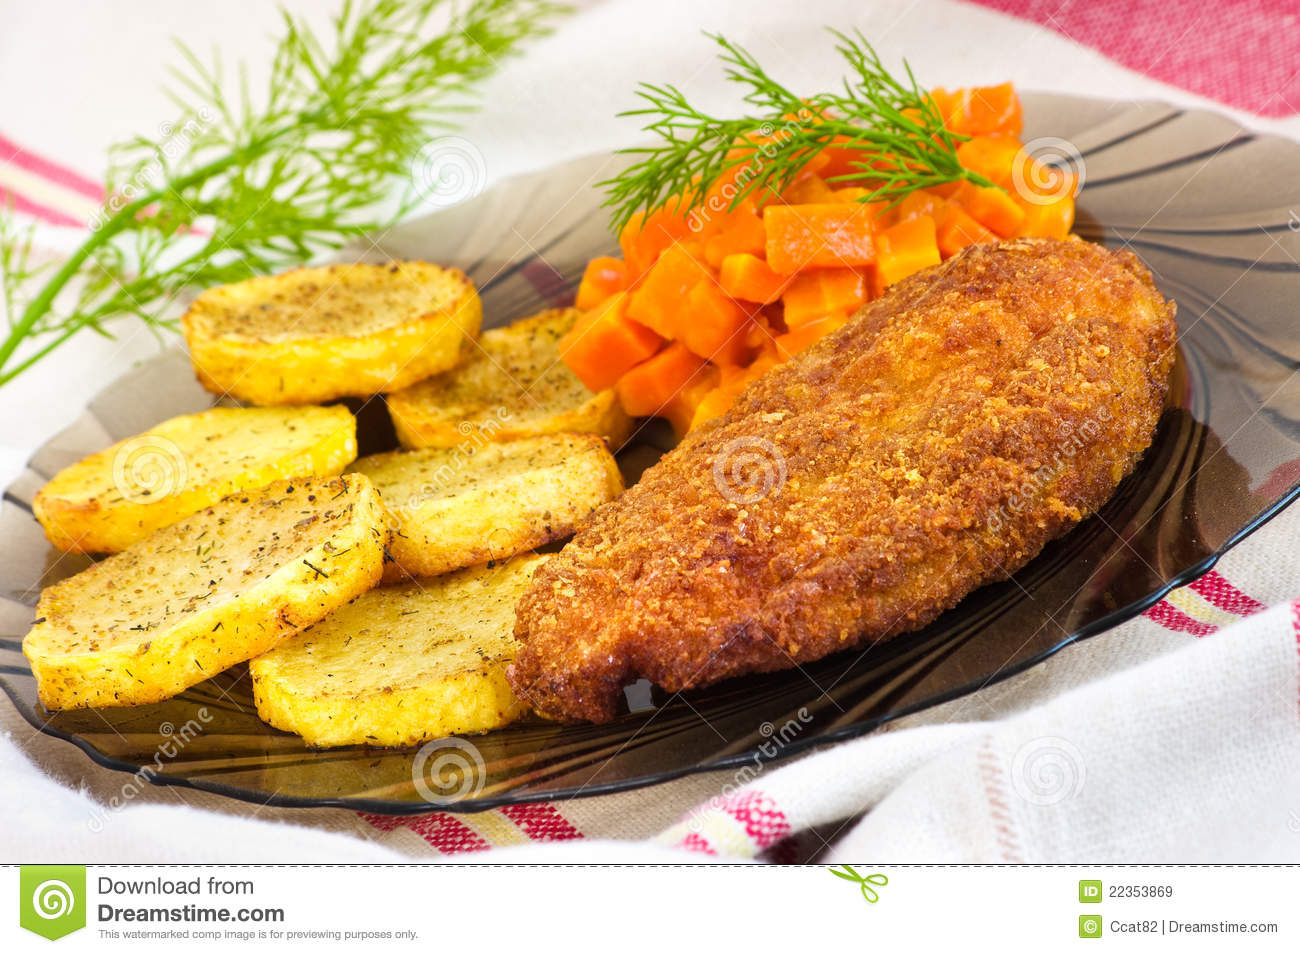 Parmesan Breaded Chicken Breast With Carrot And Potato Slices